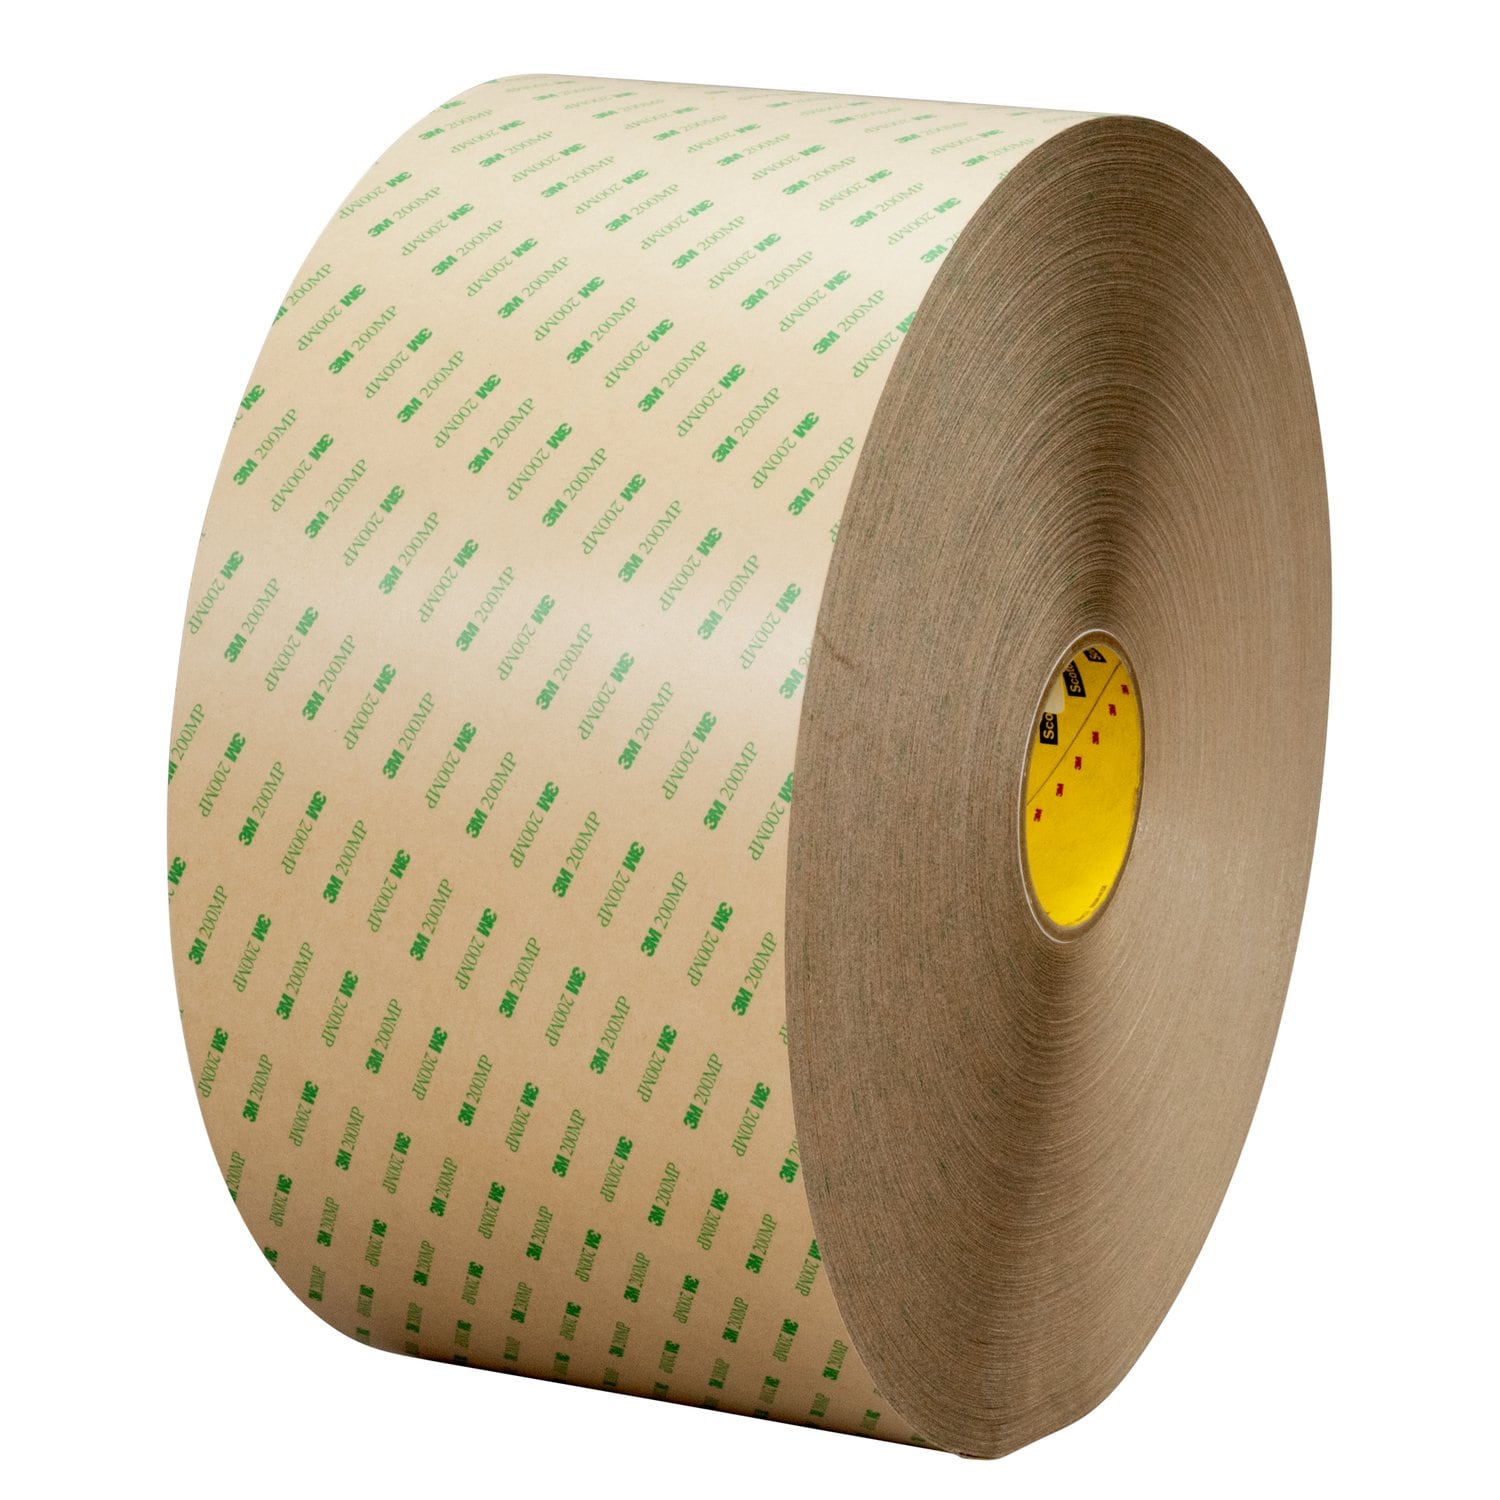 7010334211 - 3M Adhesive Transfer Tape 9668MP, Clear, 12 in x 60 yd, 5 Mil, 4/Case